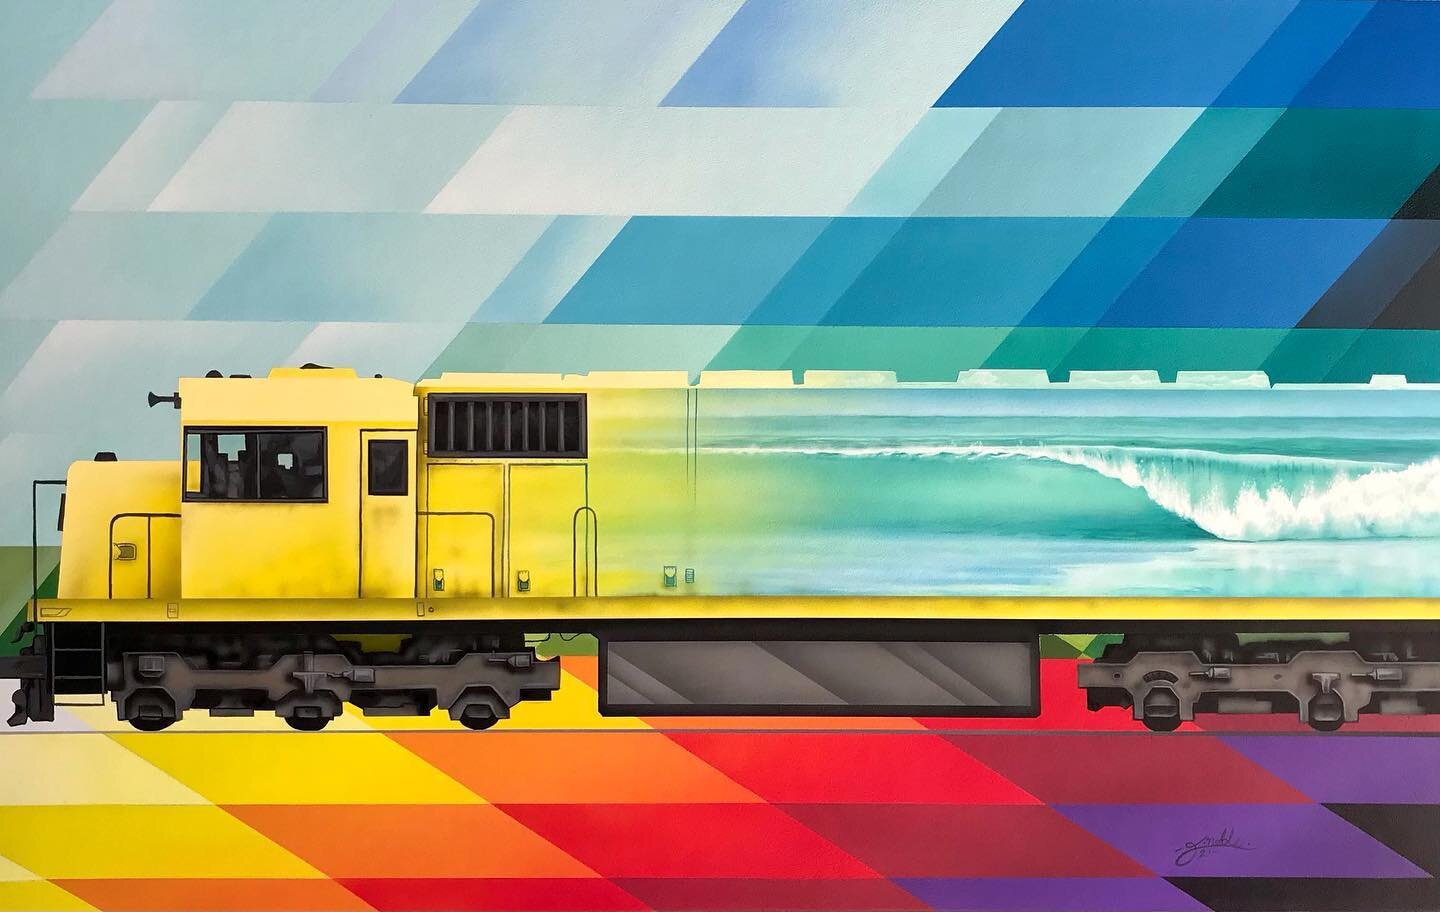 &lsquo;Freightdrainer&rdquo; 800x500mm
An ode to fast moving ,hollow and heavy waves On a backdrop inspired by early surfboard colour pallet and design.
 So stoked to finish this painting and finally the series is complete. 15 new painting , on show 